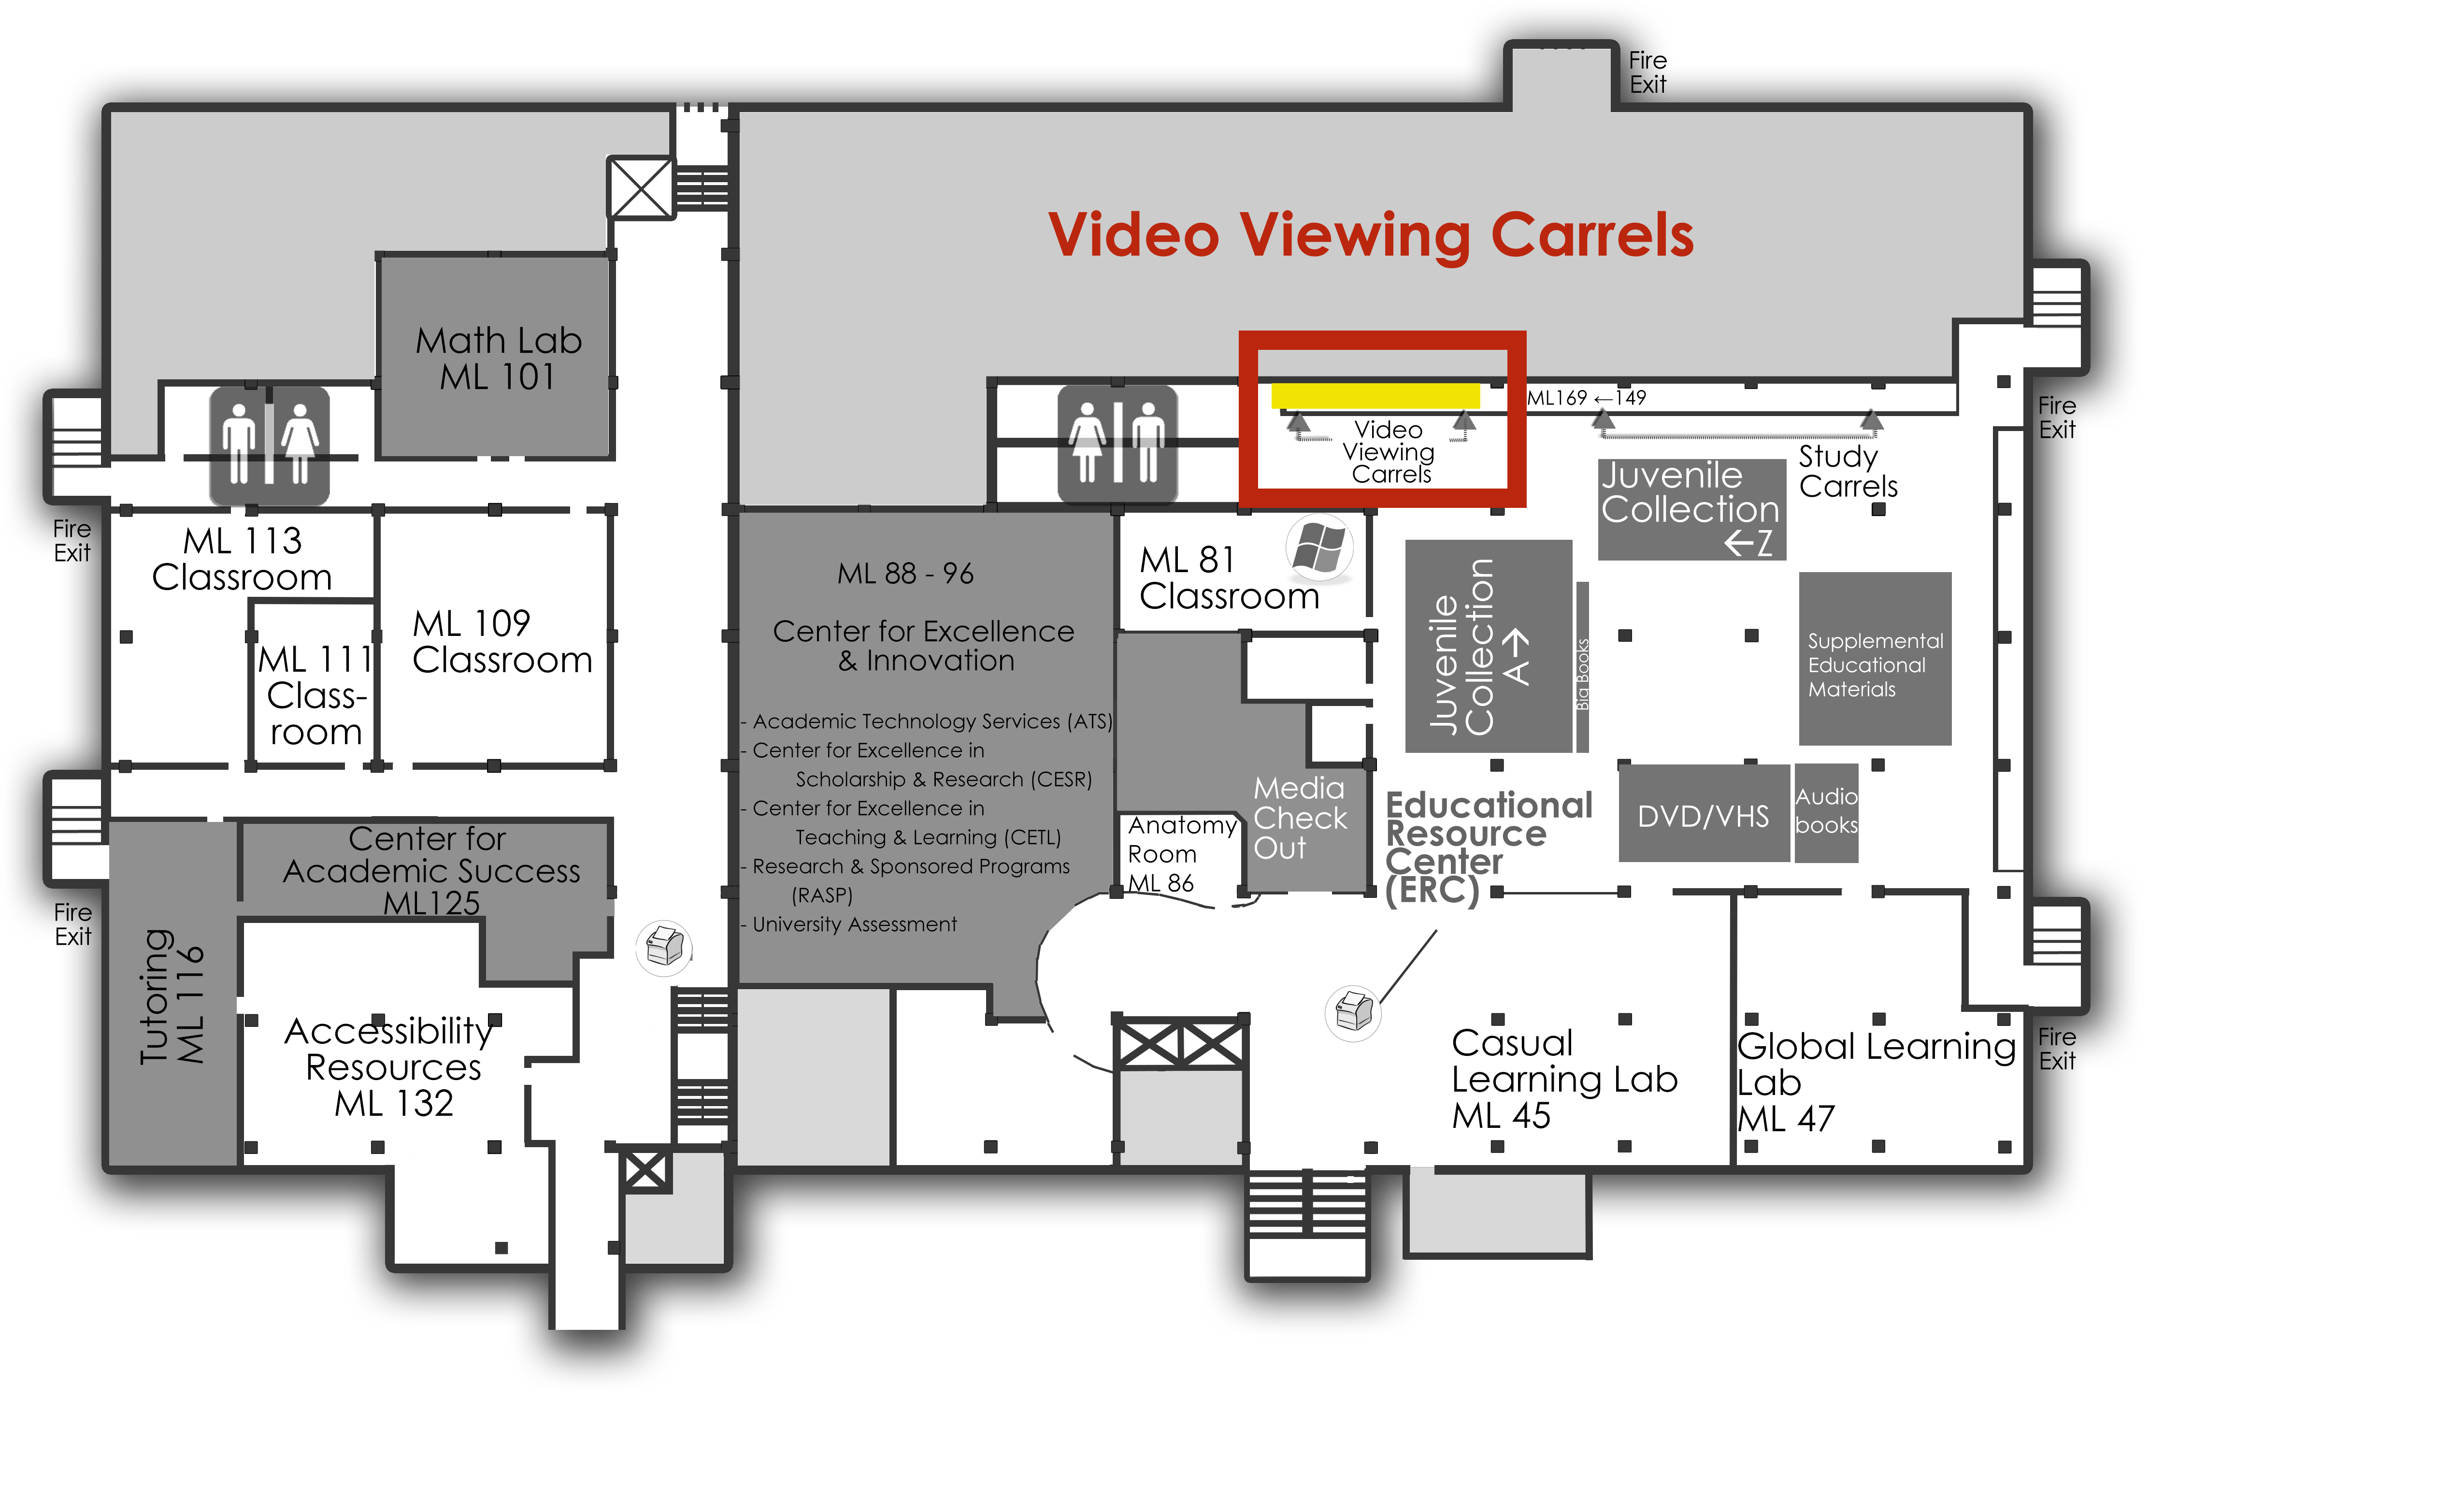 map of video viewing carrels